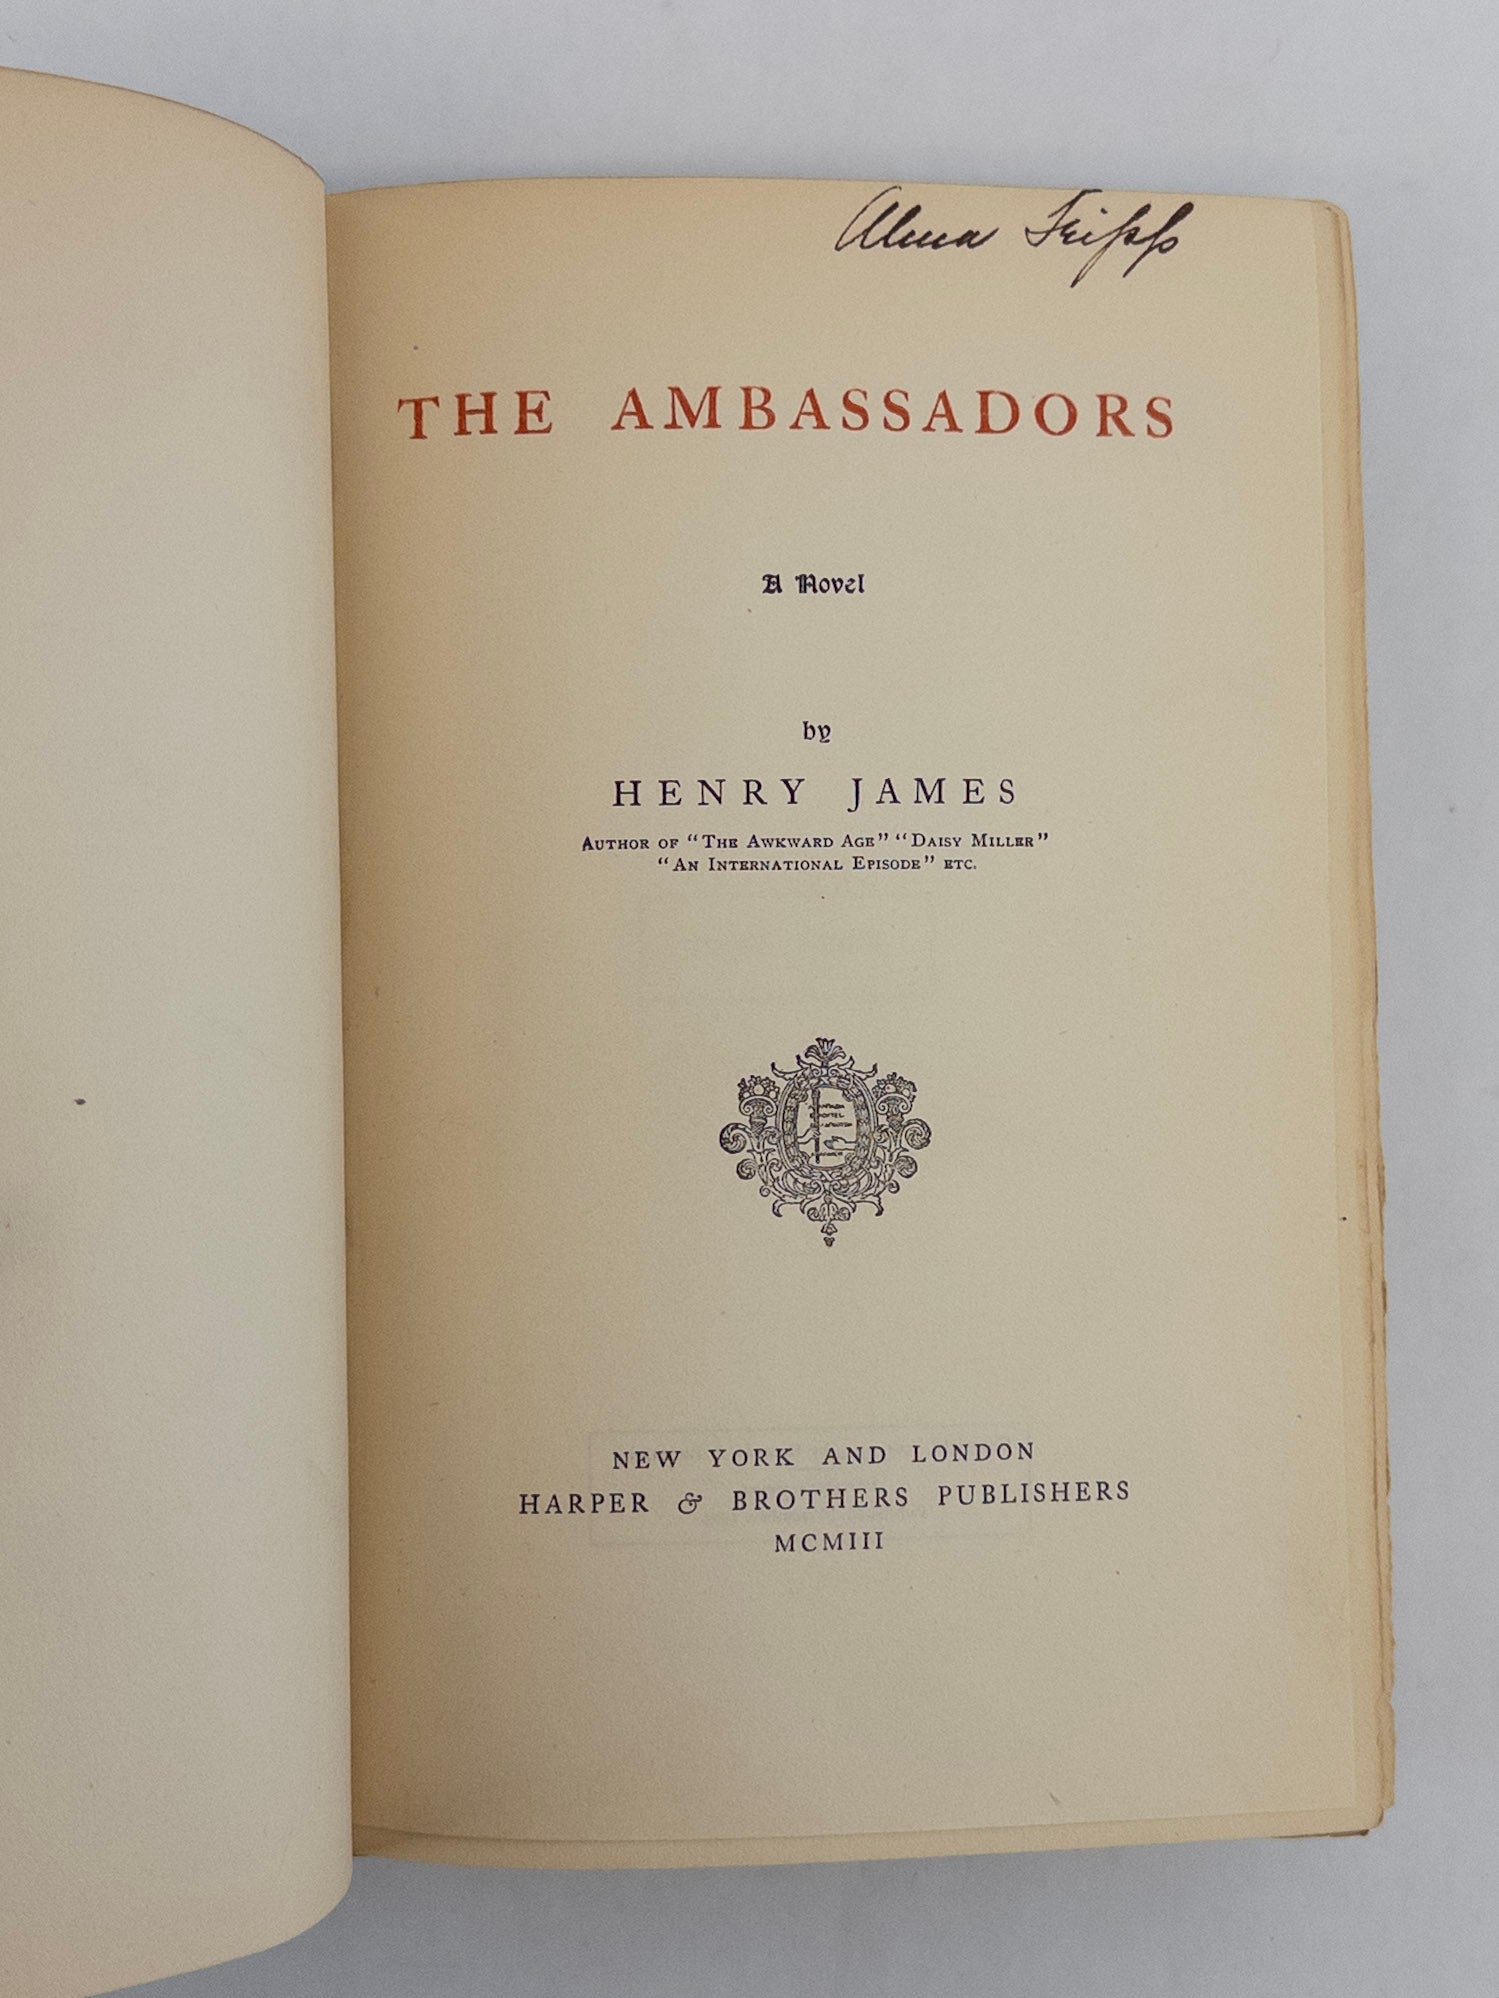 Product Image for THE AMBASSADORS